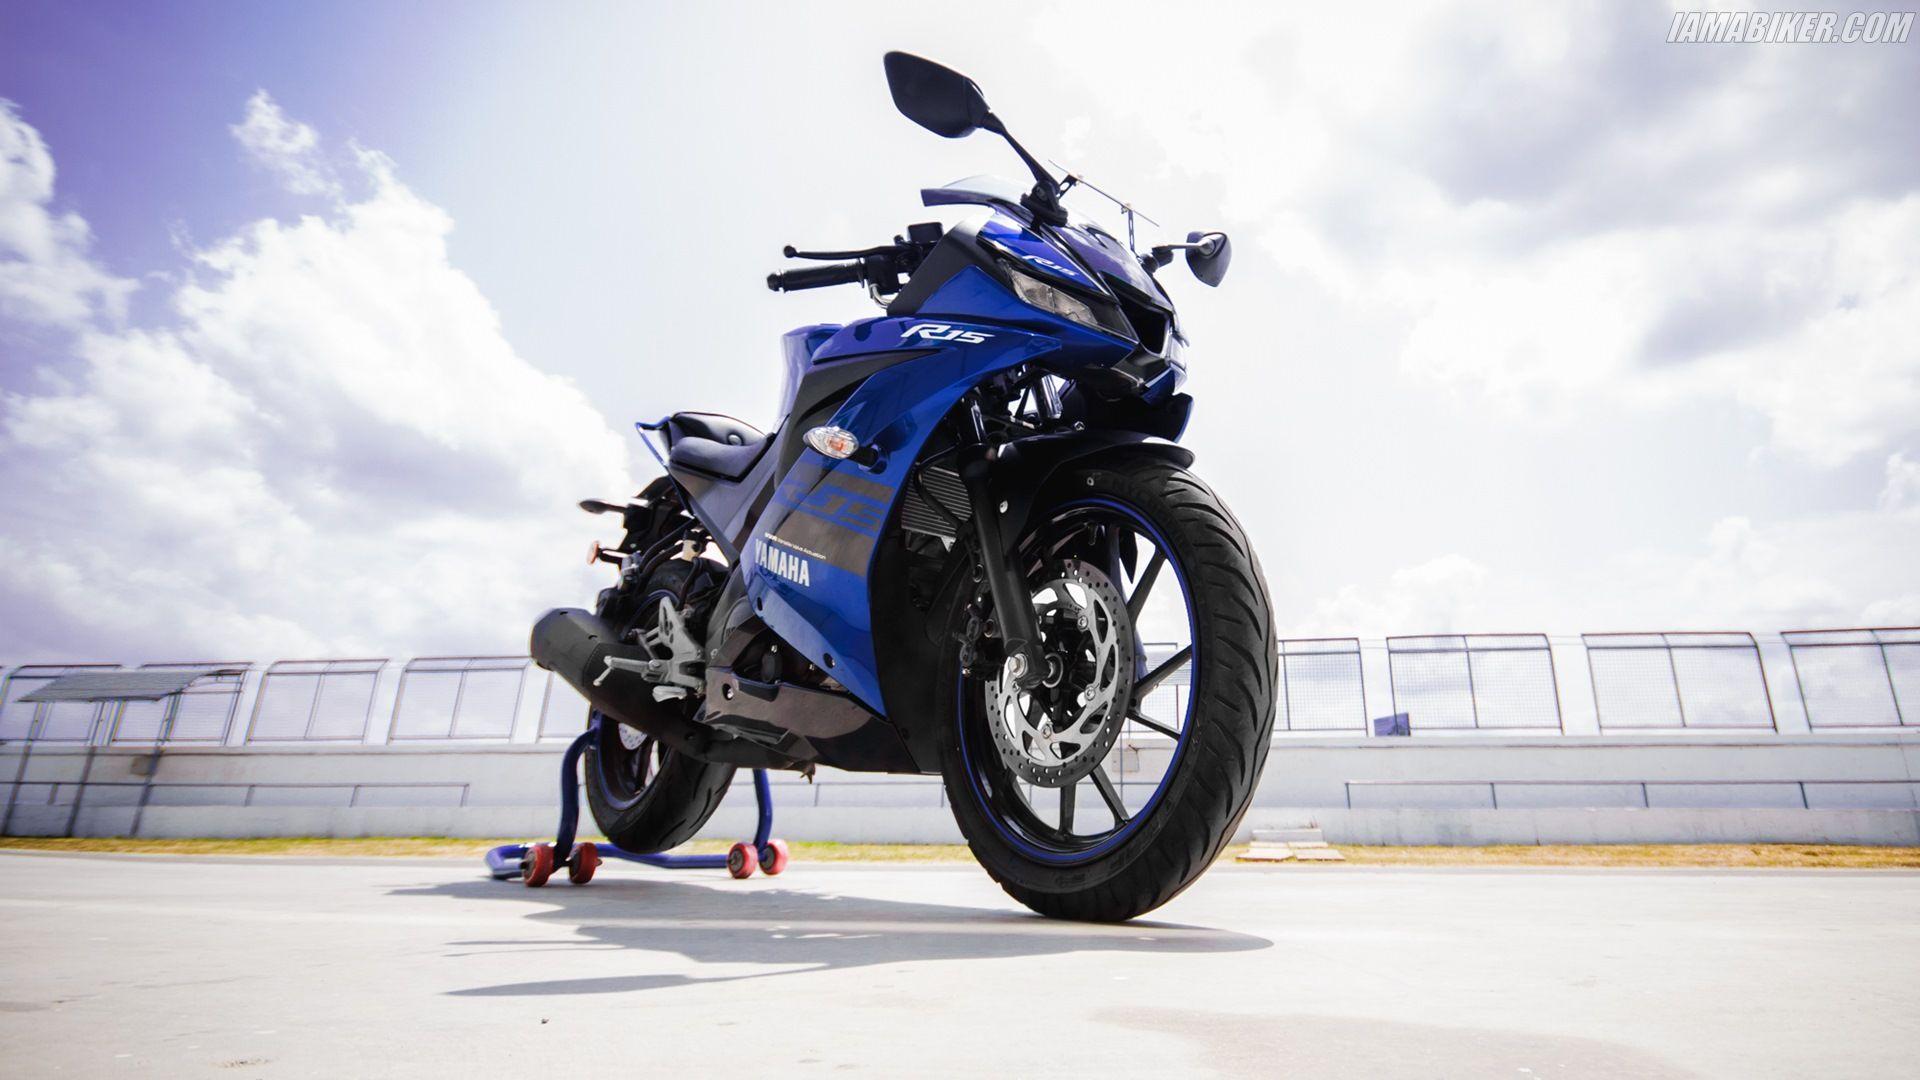 Yamaha R15 Wallpapers  Top 35 Best Yamaha R15 Backgrounds Download